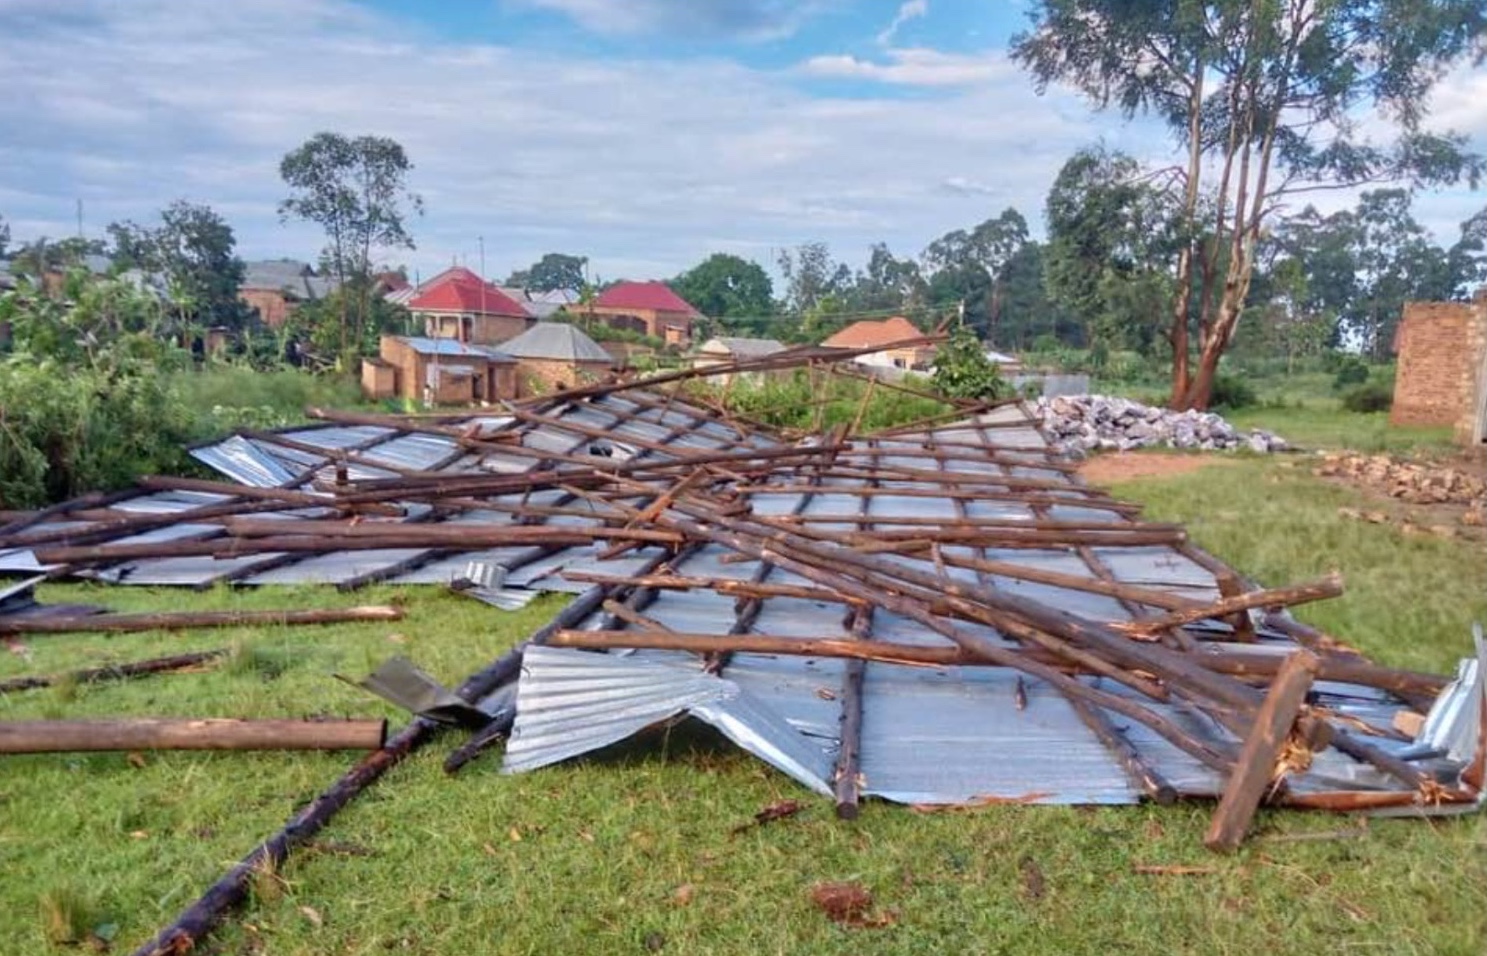 Iron sheets and roofing poles on the ground